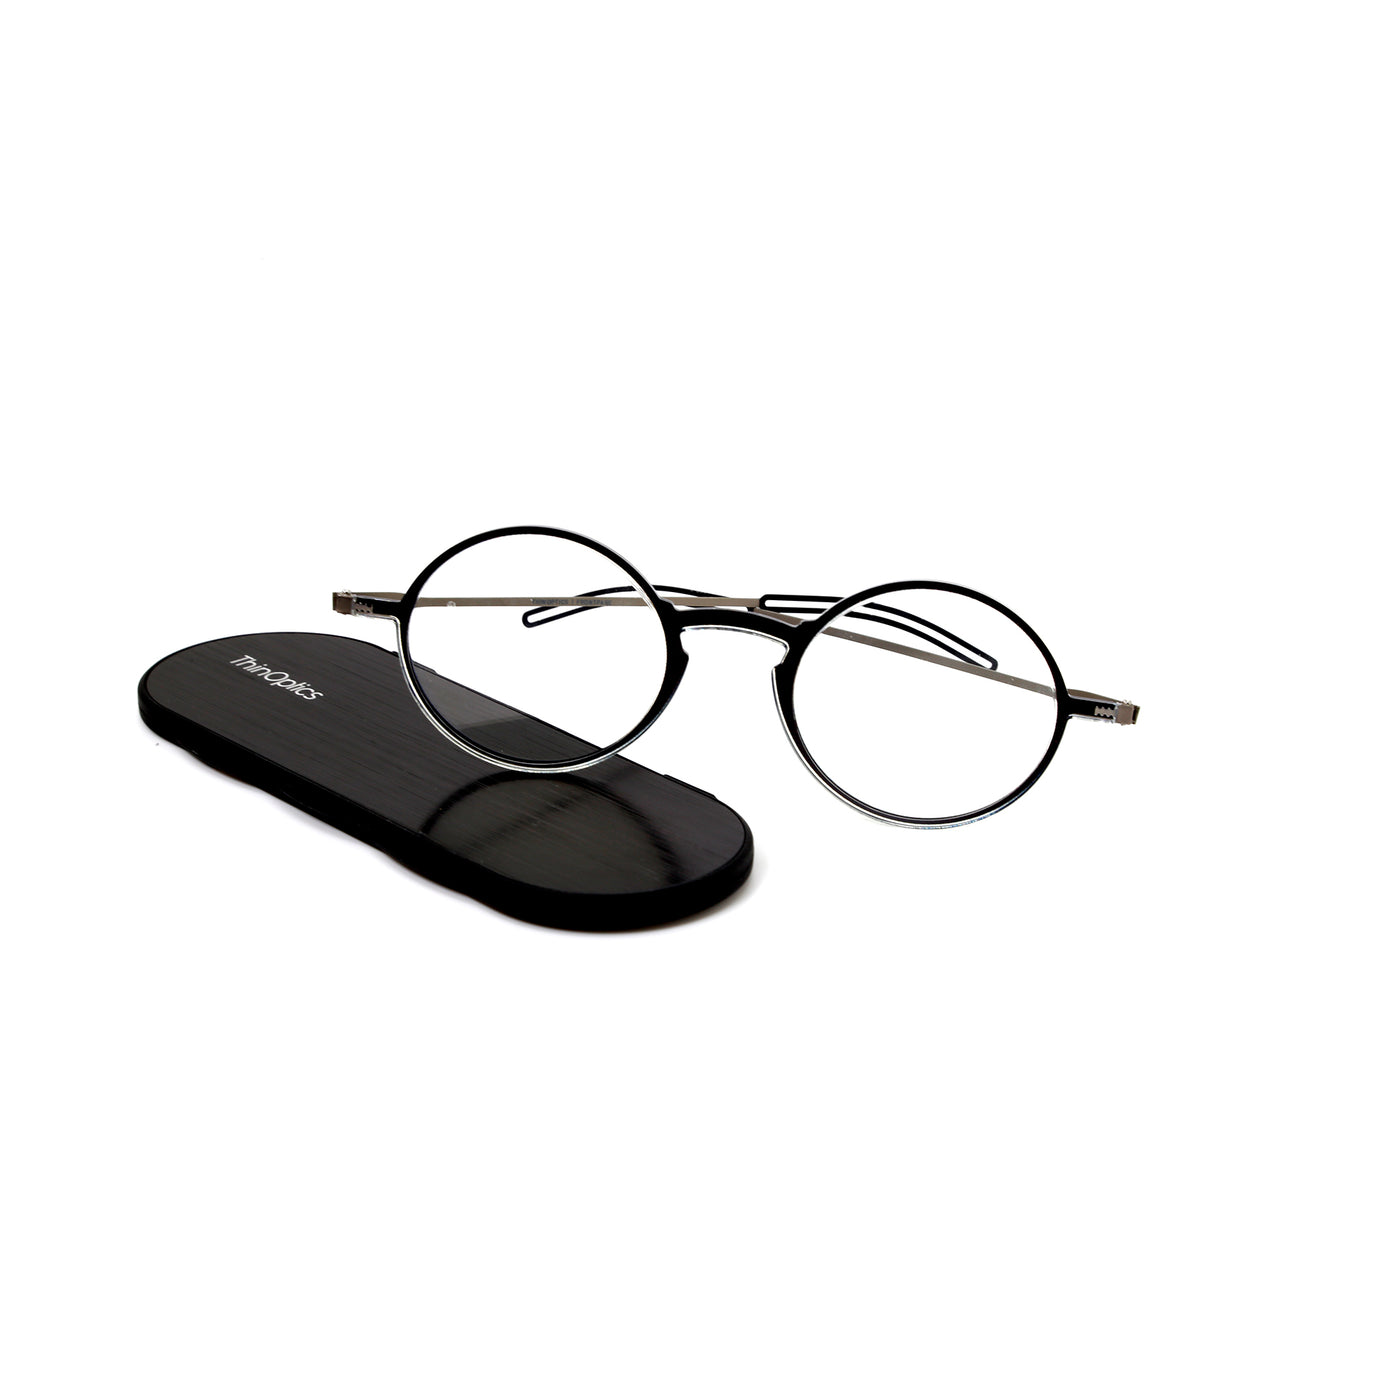 Thin Optics Computer Glasses for Men/Women | Computer Glasses - Vision Express Optical Philippines